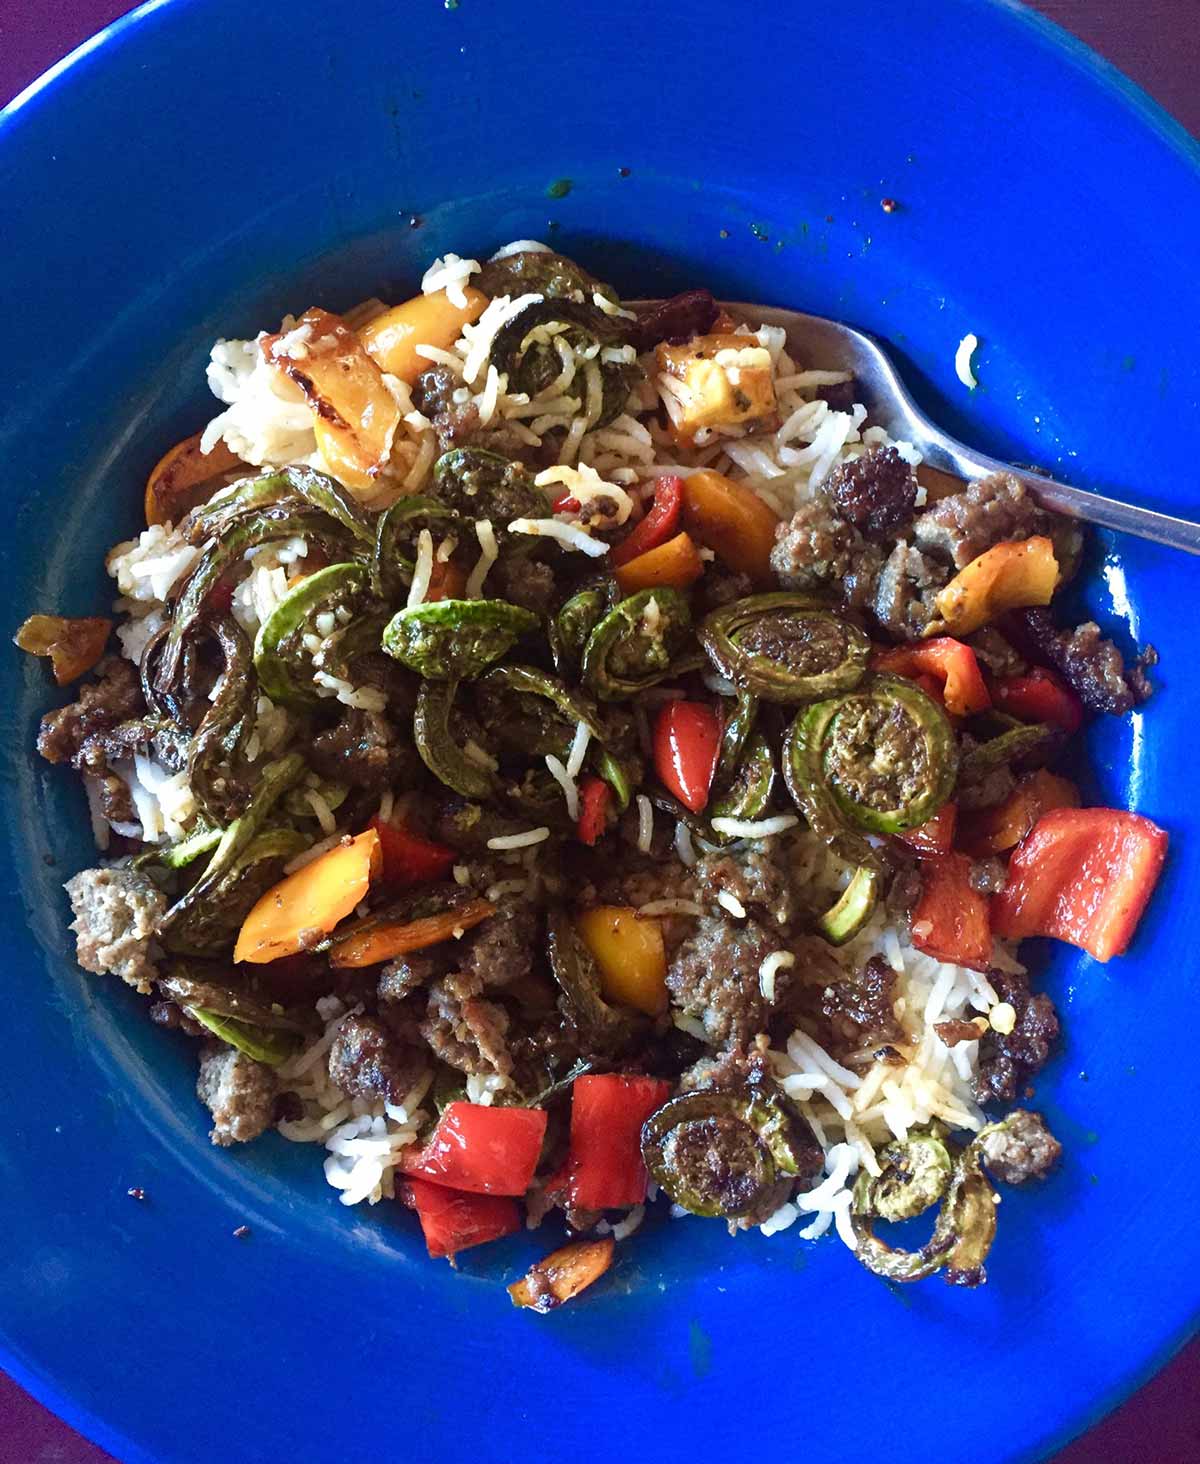 Food from Heaven - "Fiddleheads for dinner” by Lisa Grandchamps